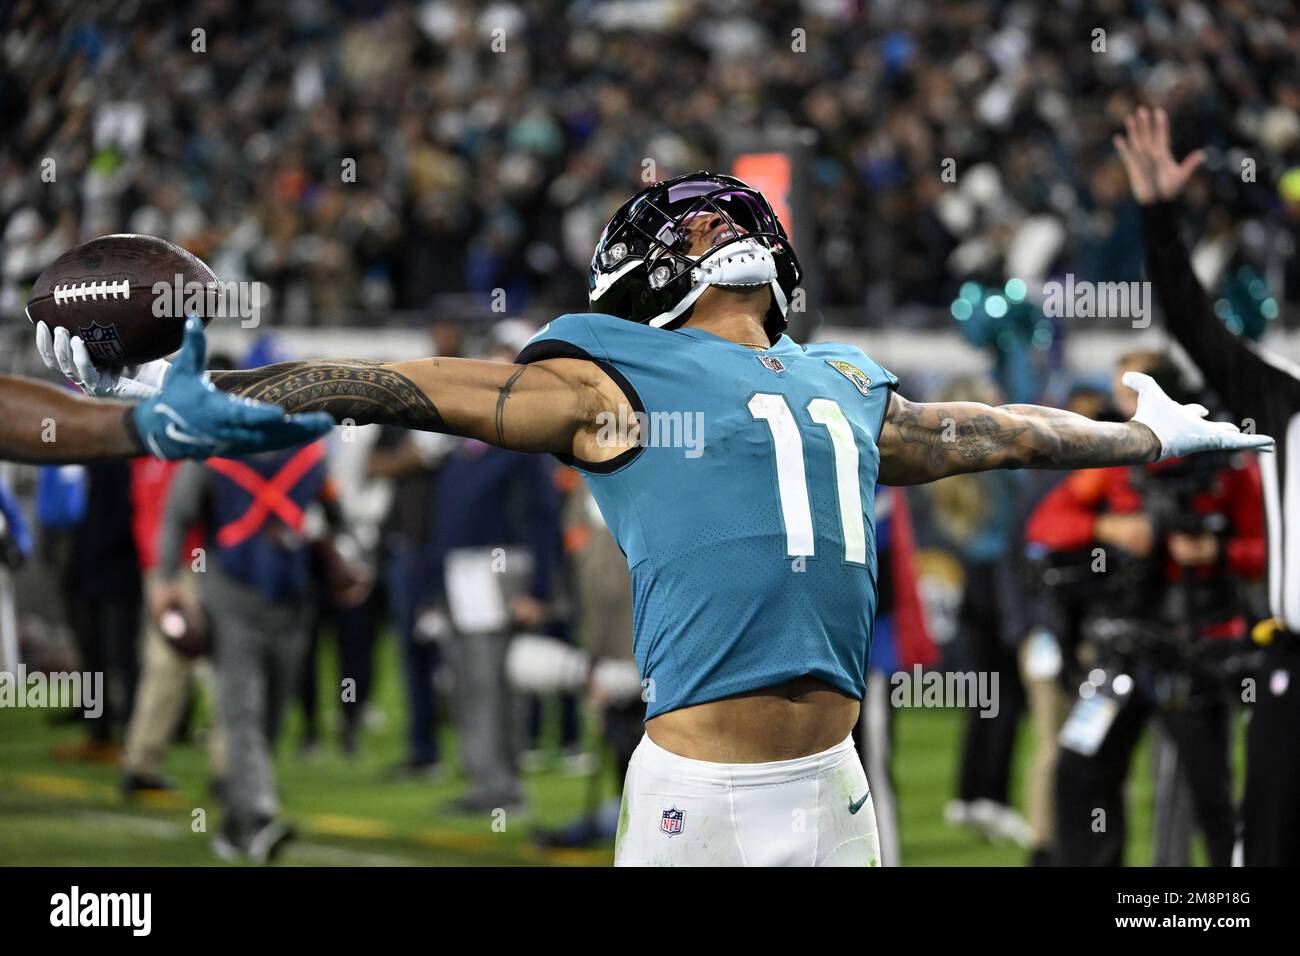 Las Vegas Raiders vs. Kansas City Chiefs. NFL Game. American Football  League match. Silhouette of professional player celebrate touch down.  Screen in Stock Photo - Alamy